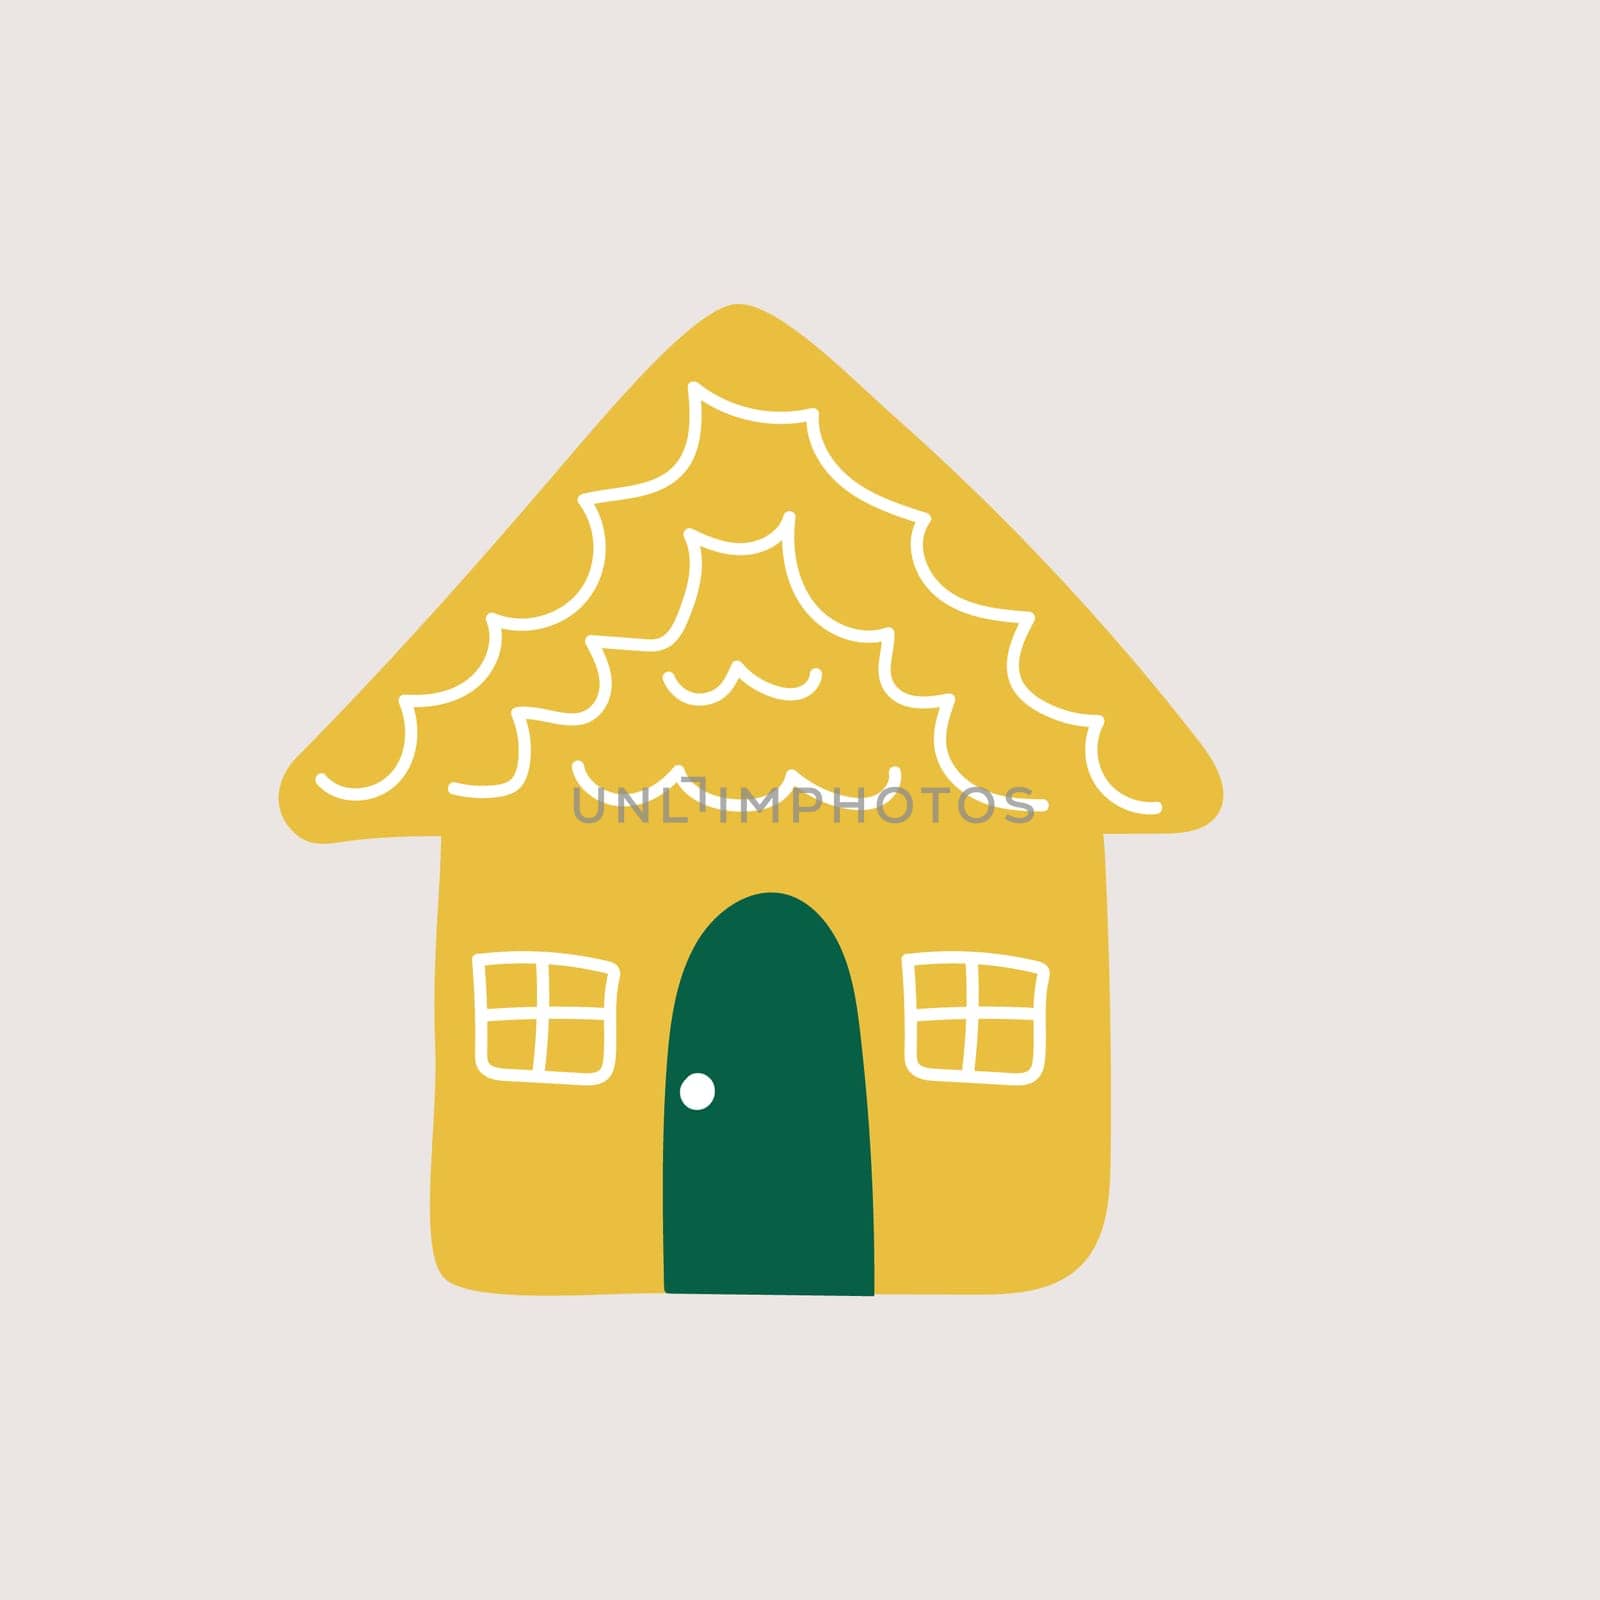 Cozy winter yellow house on grey background. Cute hand drawn vector illustration for greeting card, invitation